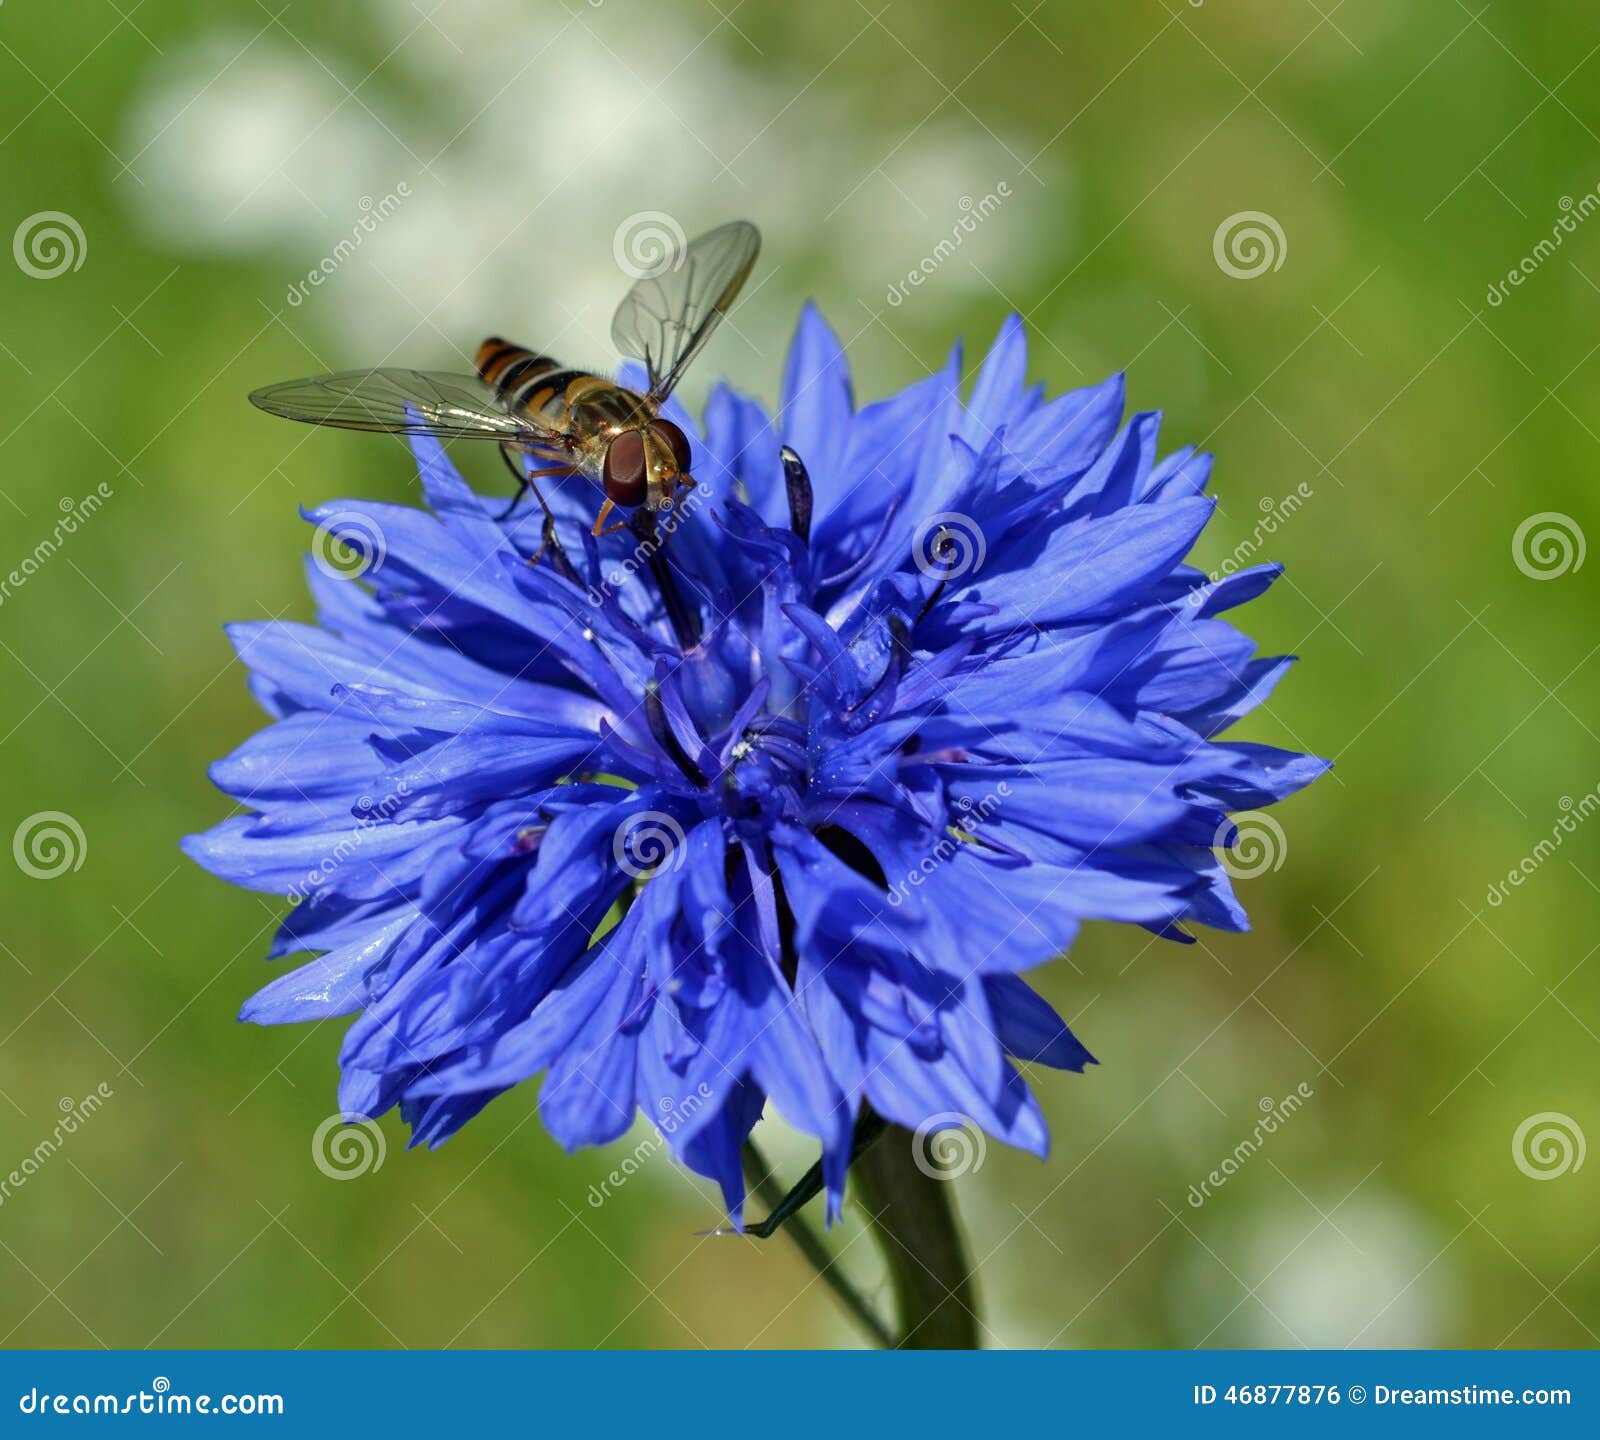 hover fly on a corn flower